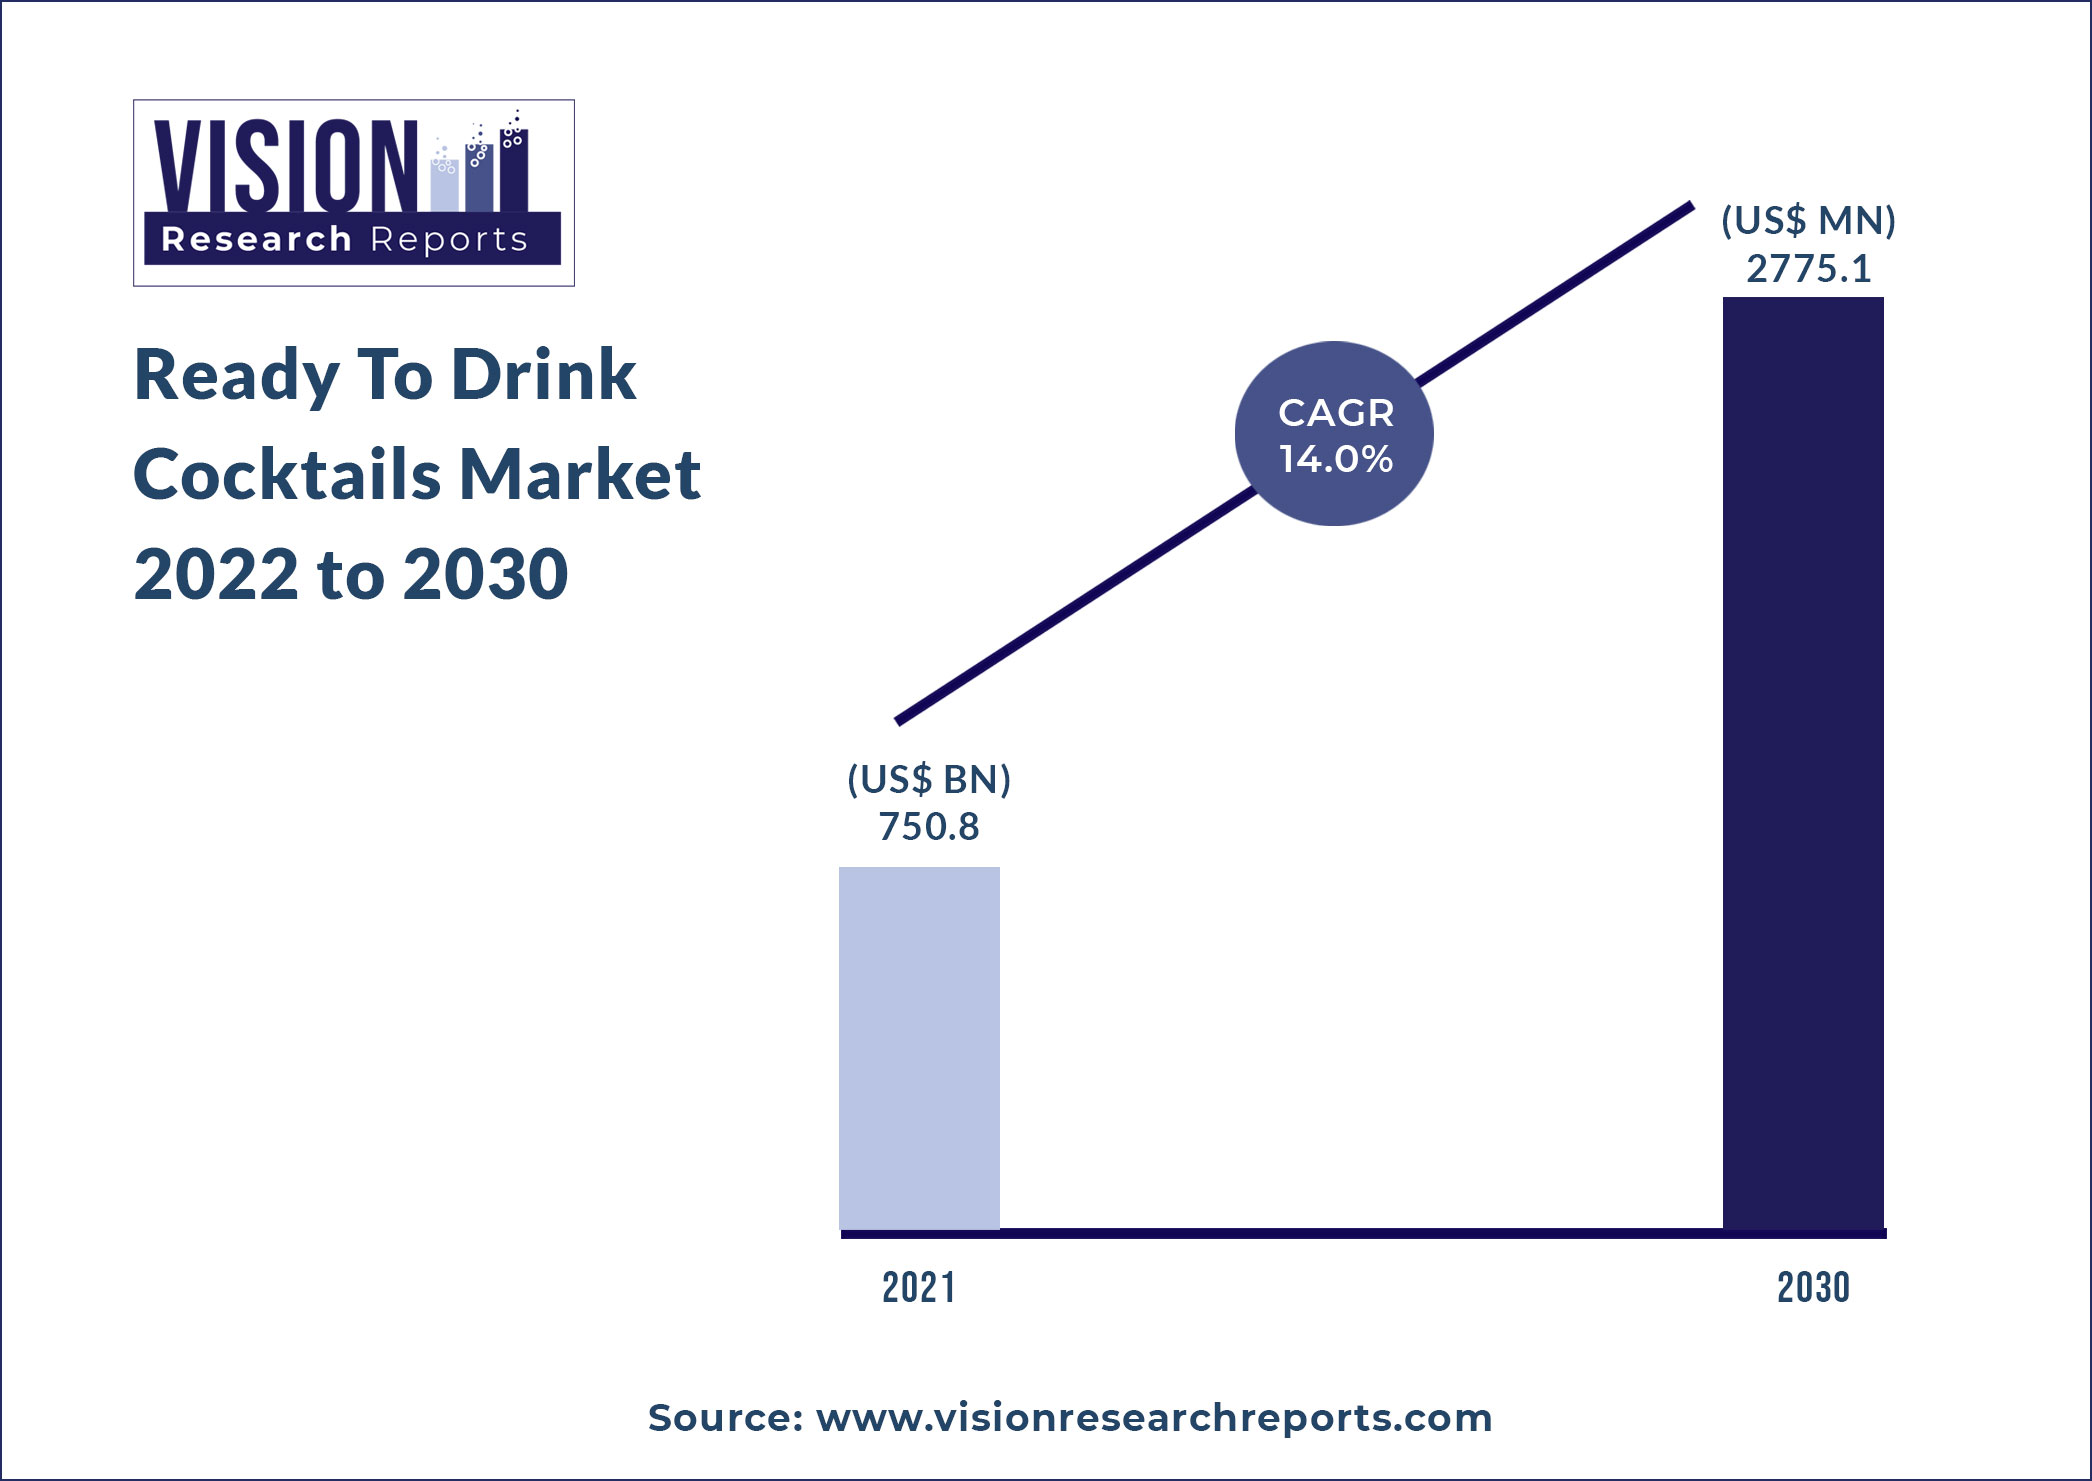 Ready To Drink Cocktails Market Size 2022 to 2030